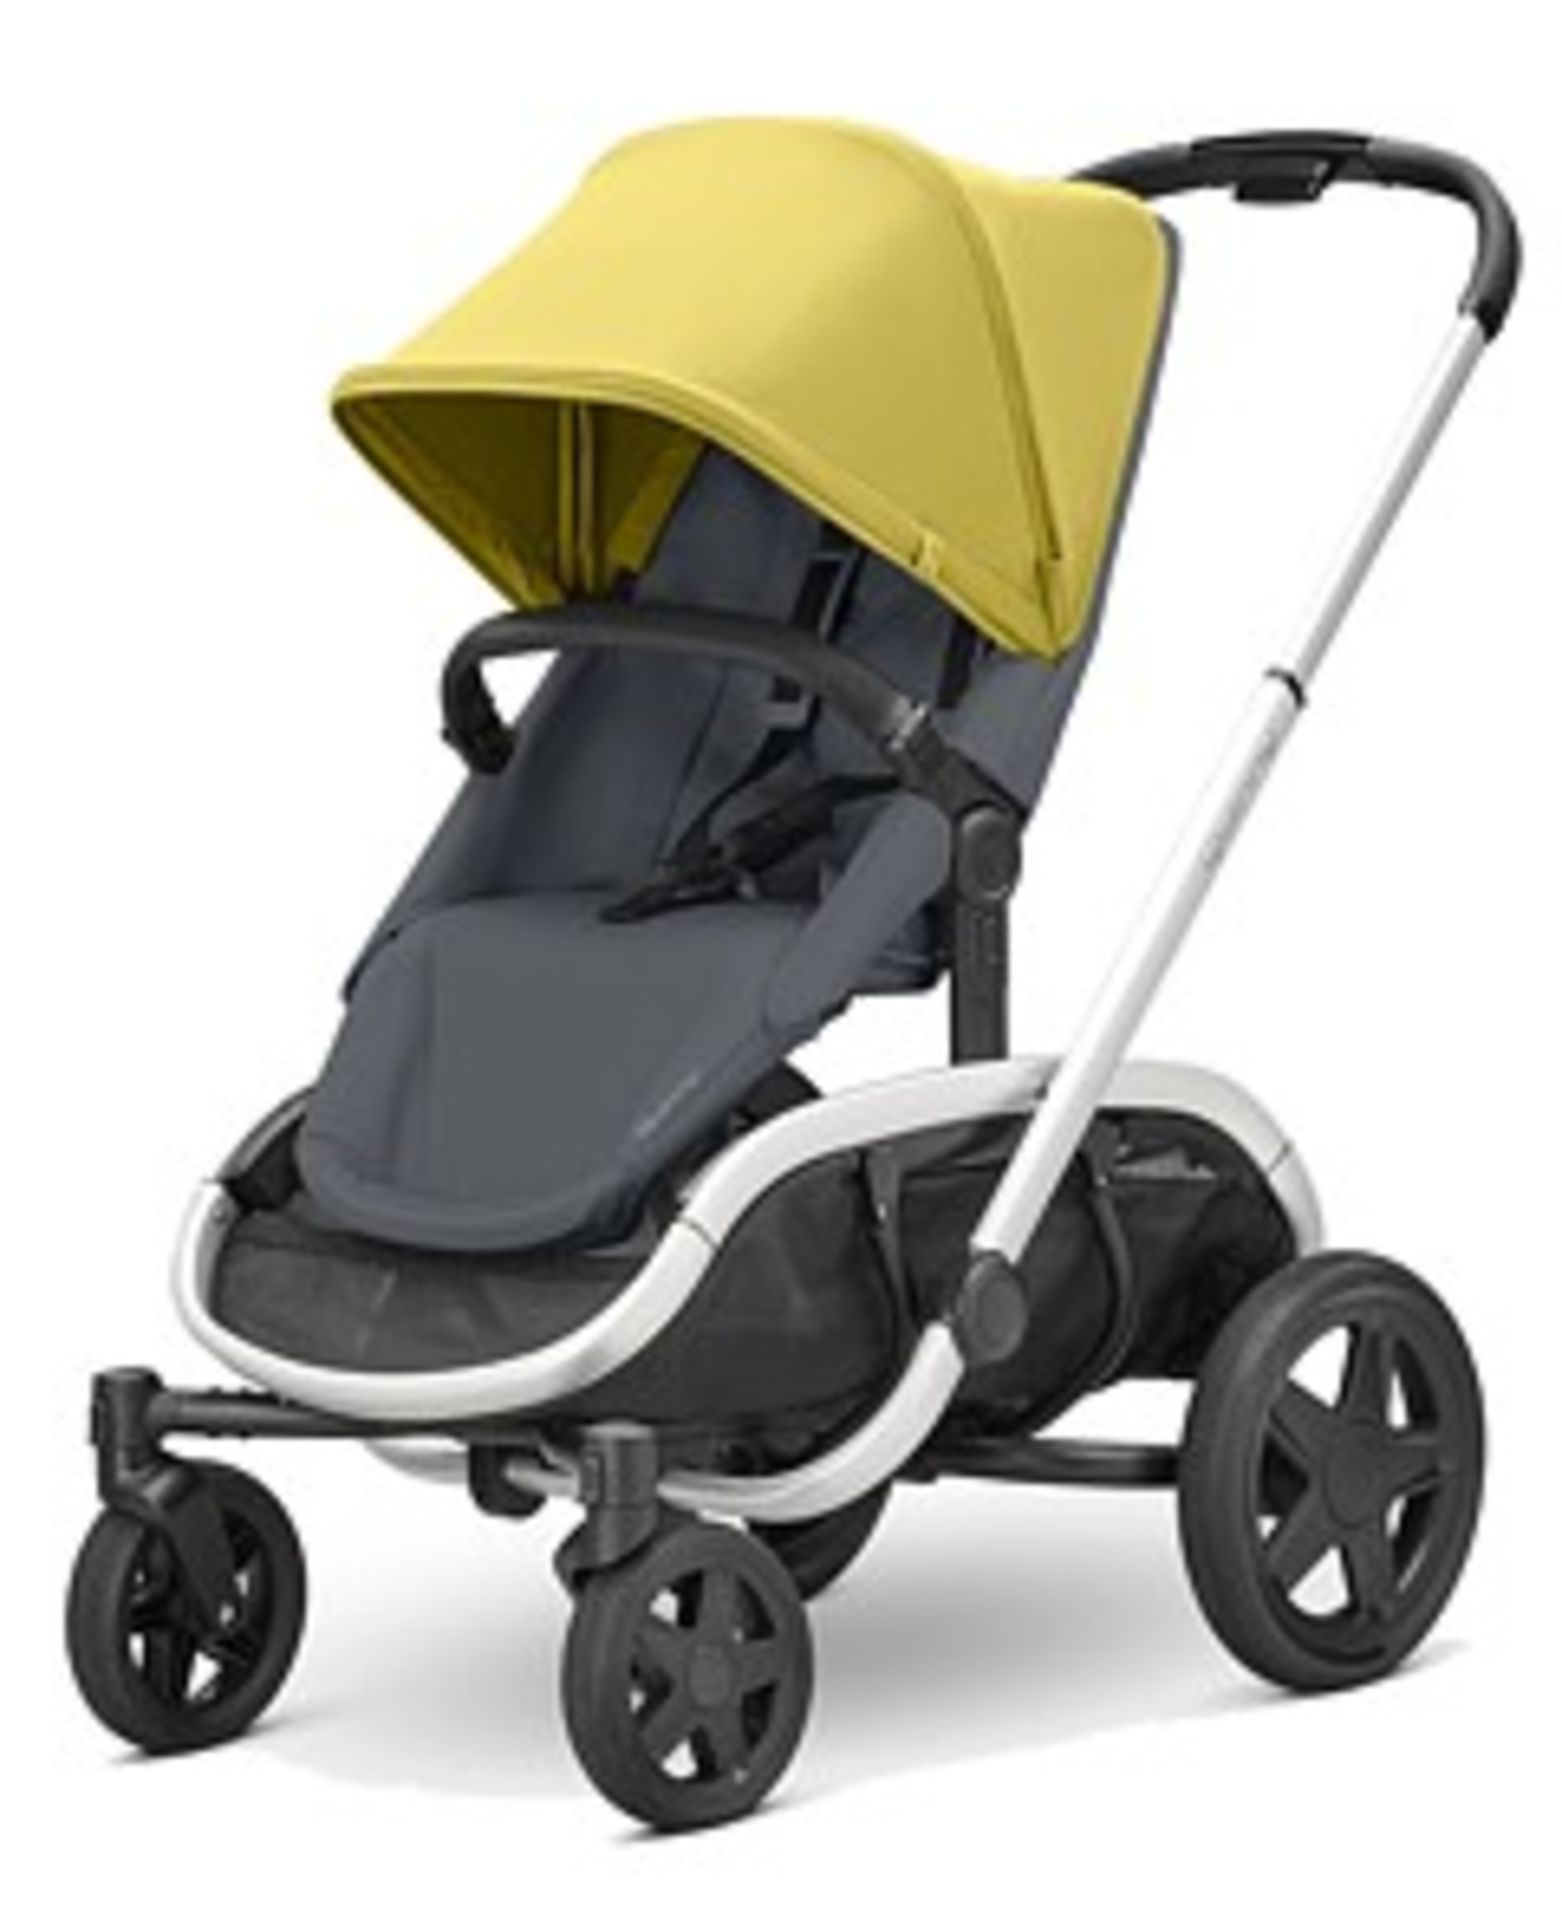 QUINNY HUBB STROLLER IN BLACK GREY AND MUSTARD WITH QUINNY XXL SHOPPING BAG OF ACCESSORIES AS NEW